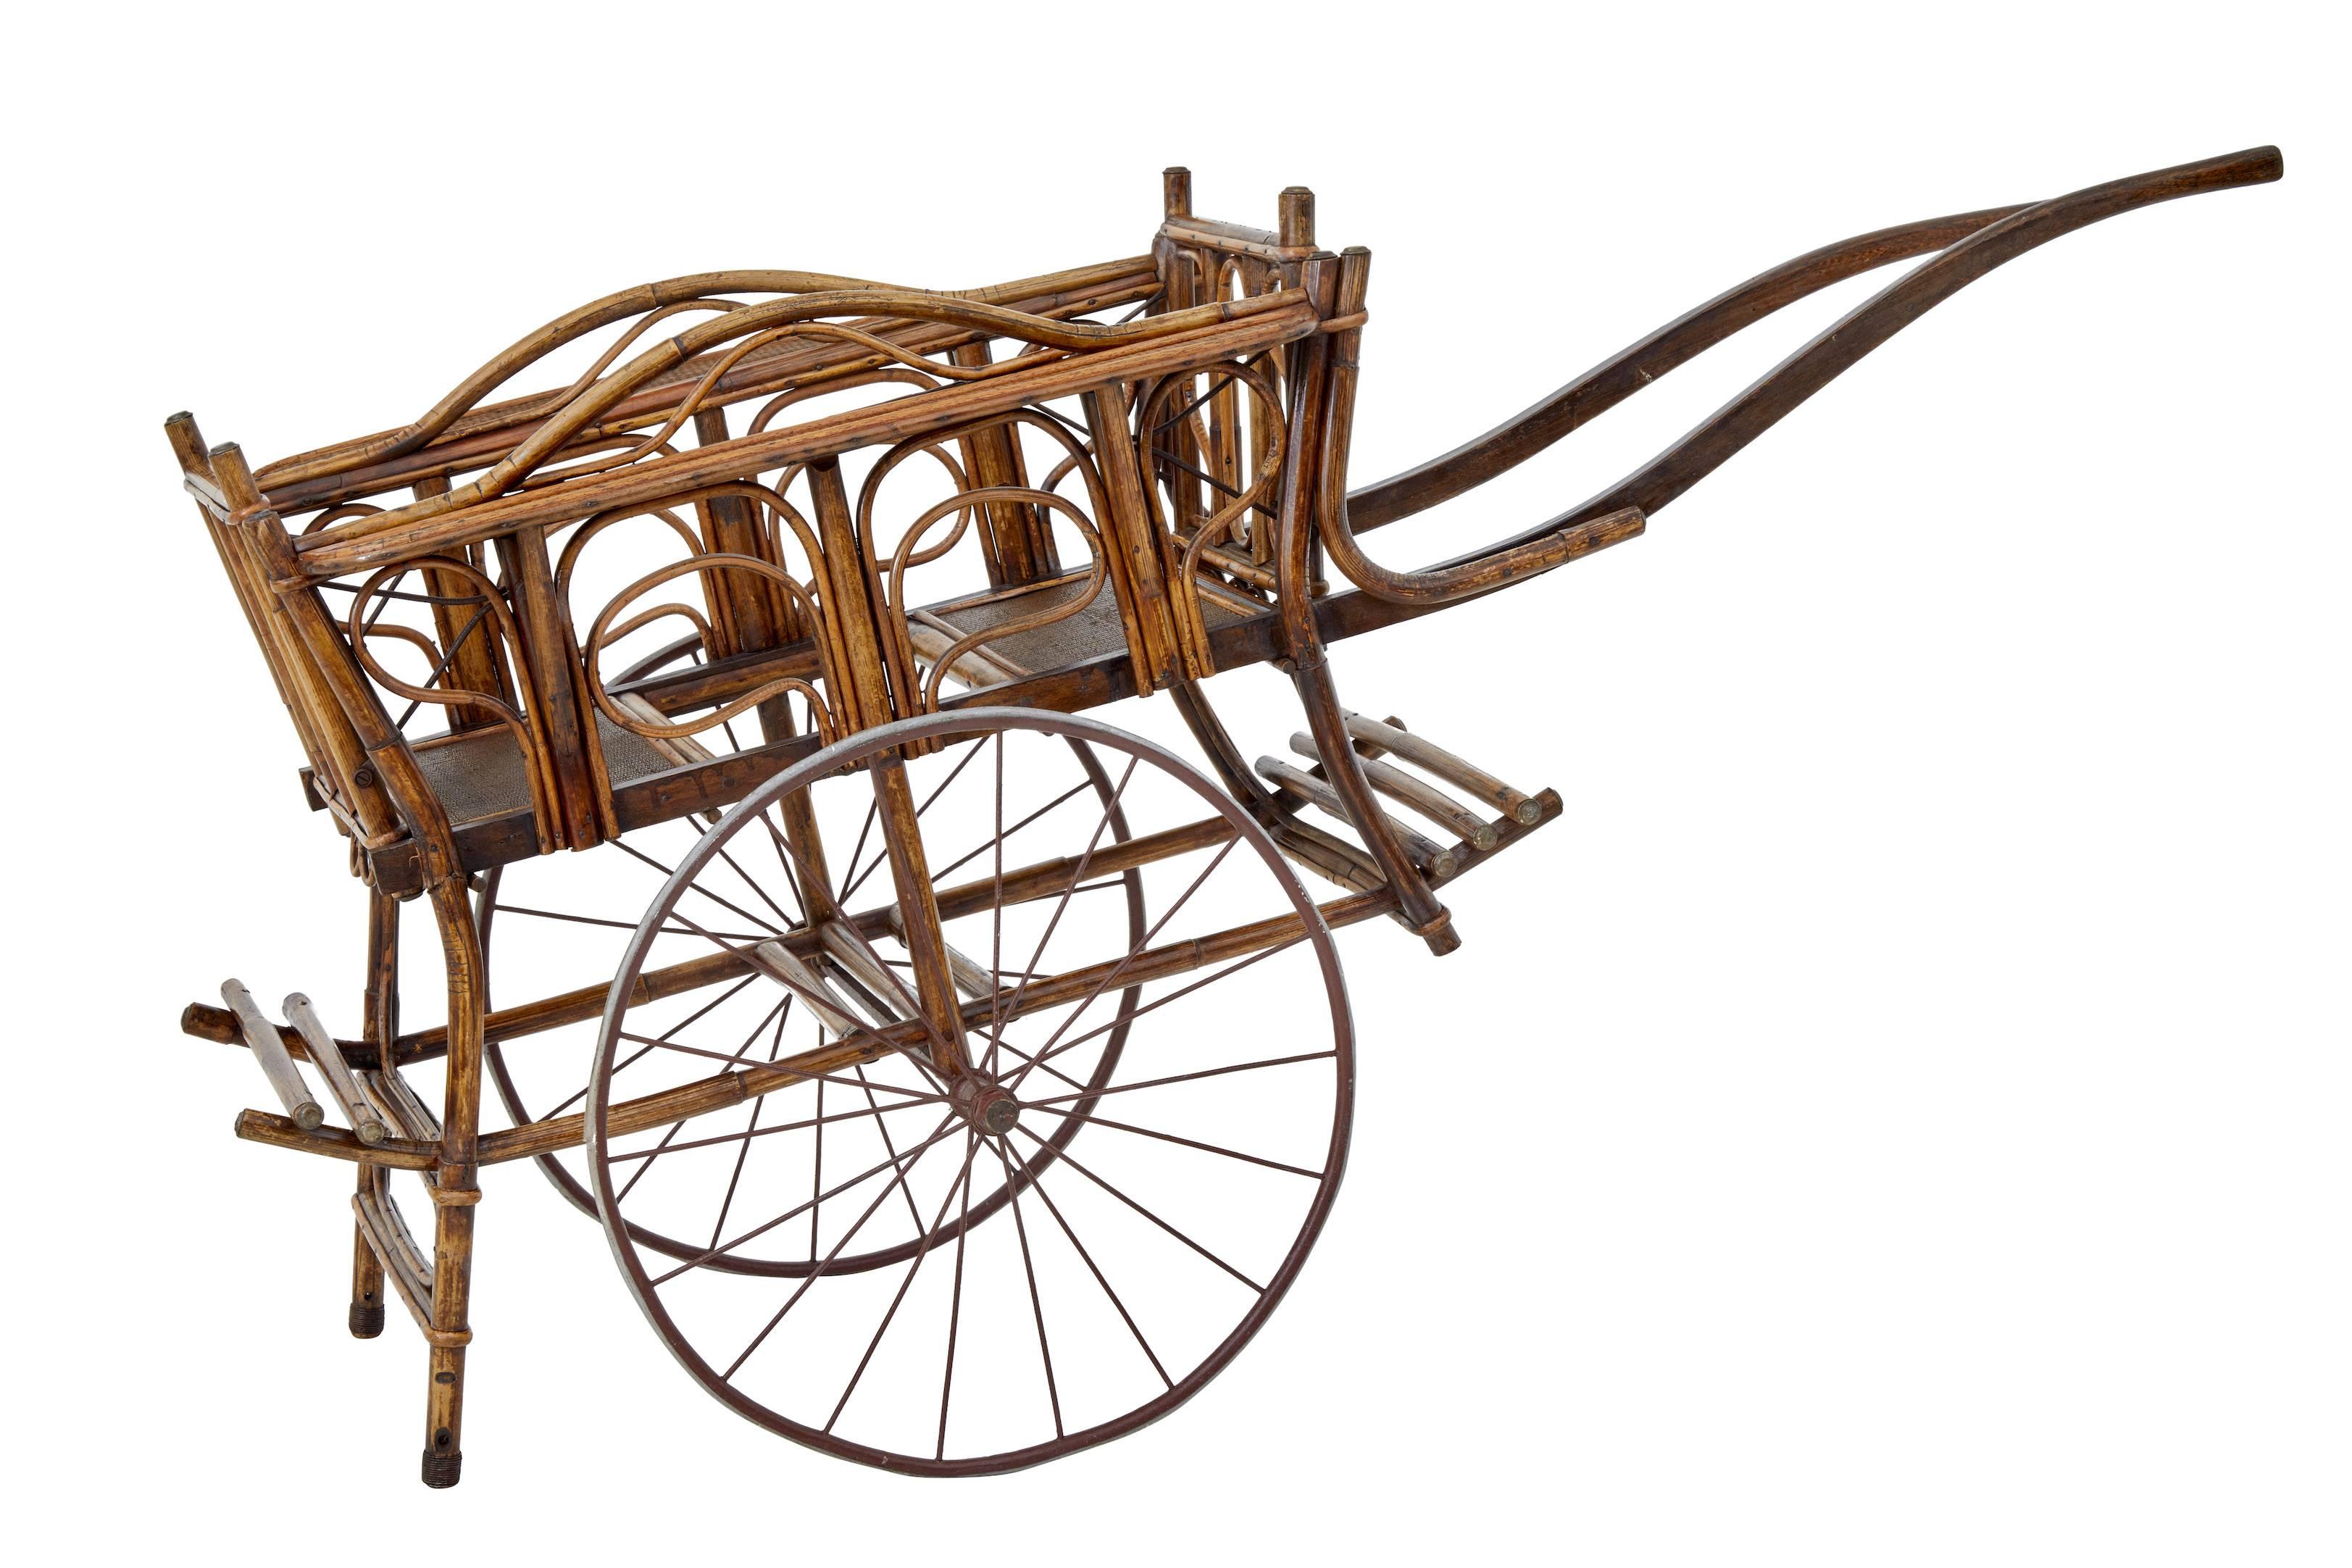 Unusual possibly Chinese bamboo two-seat children's carriage, circa 1900.

Made from shaped bamboo, bound in the traditional way with additional iron work supports.
Backs of seats flip over so the children can sit back to back or facing each